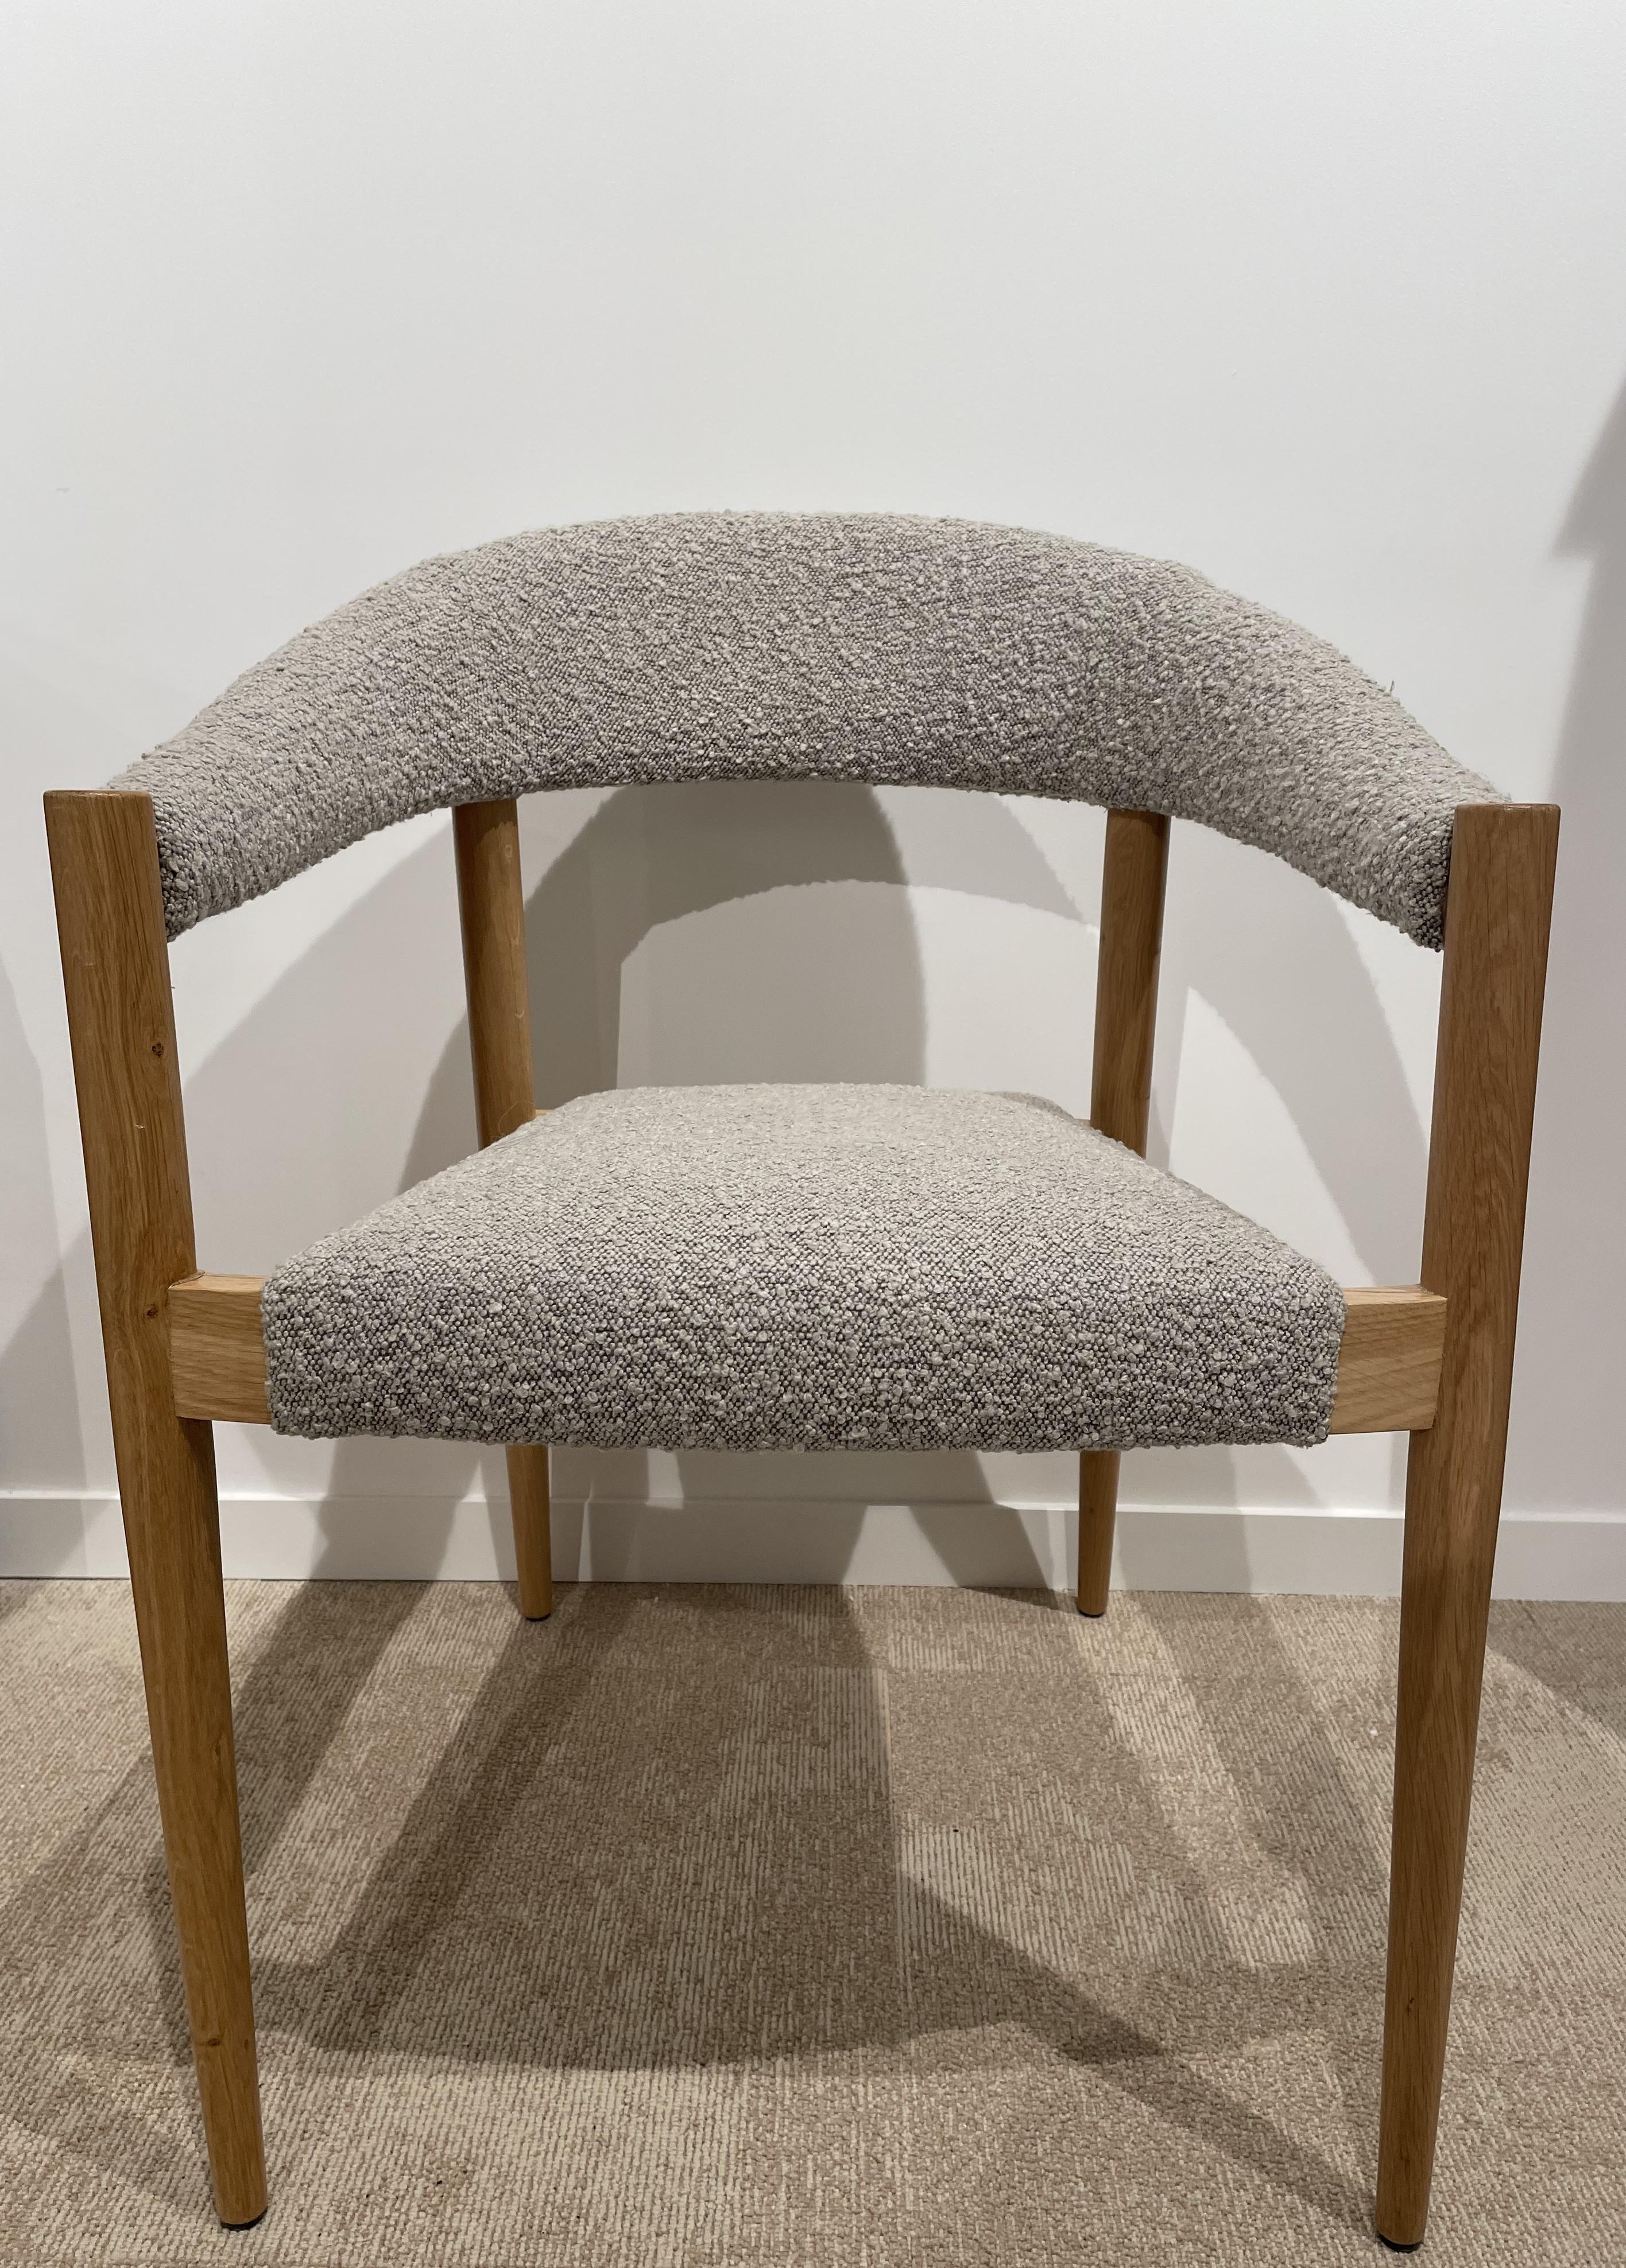 1960s Danish Design and Scandinavian Style Wooden and Bouclé Fabric Chair For Sale 8